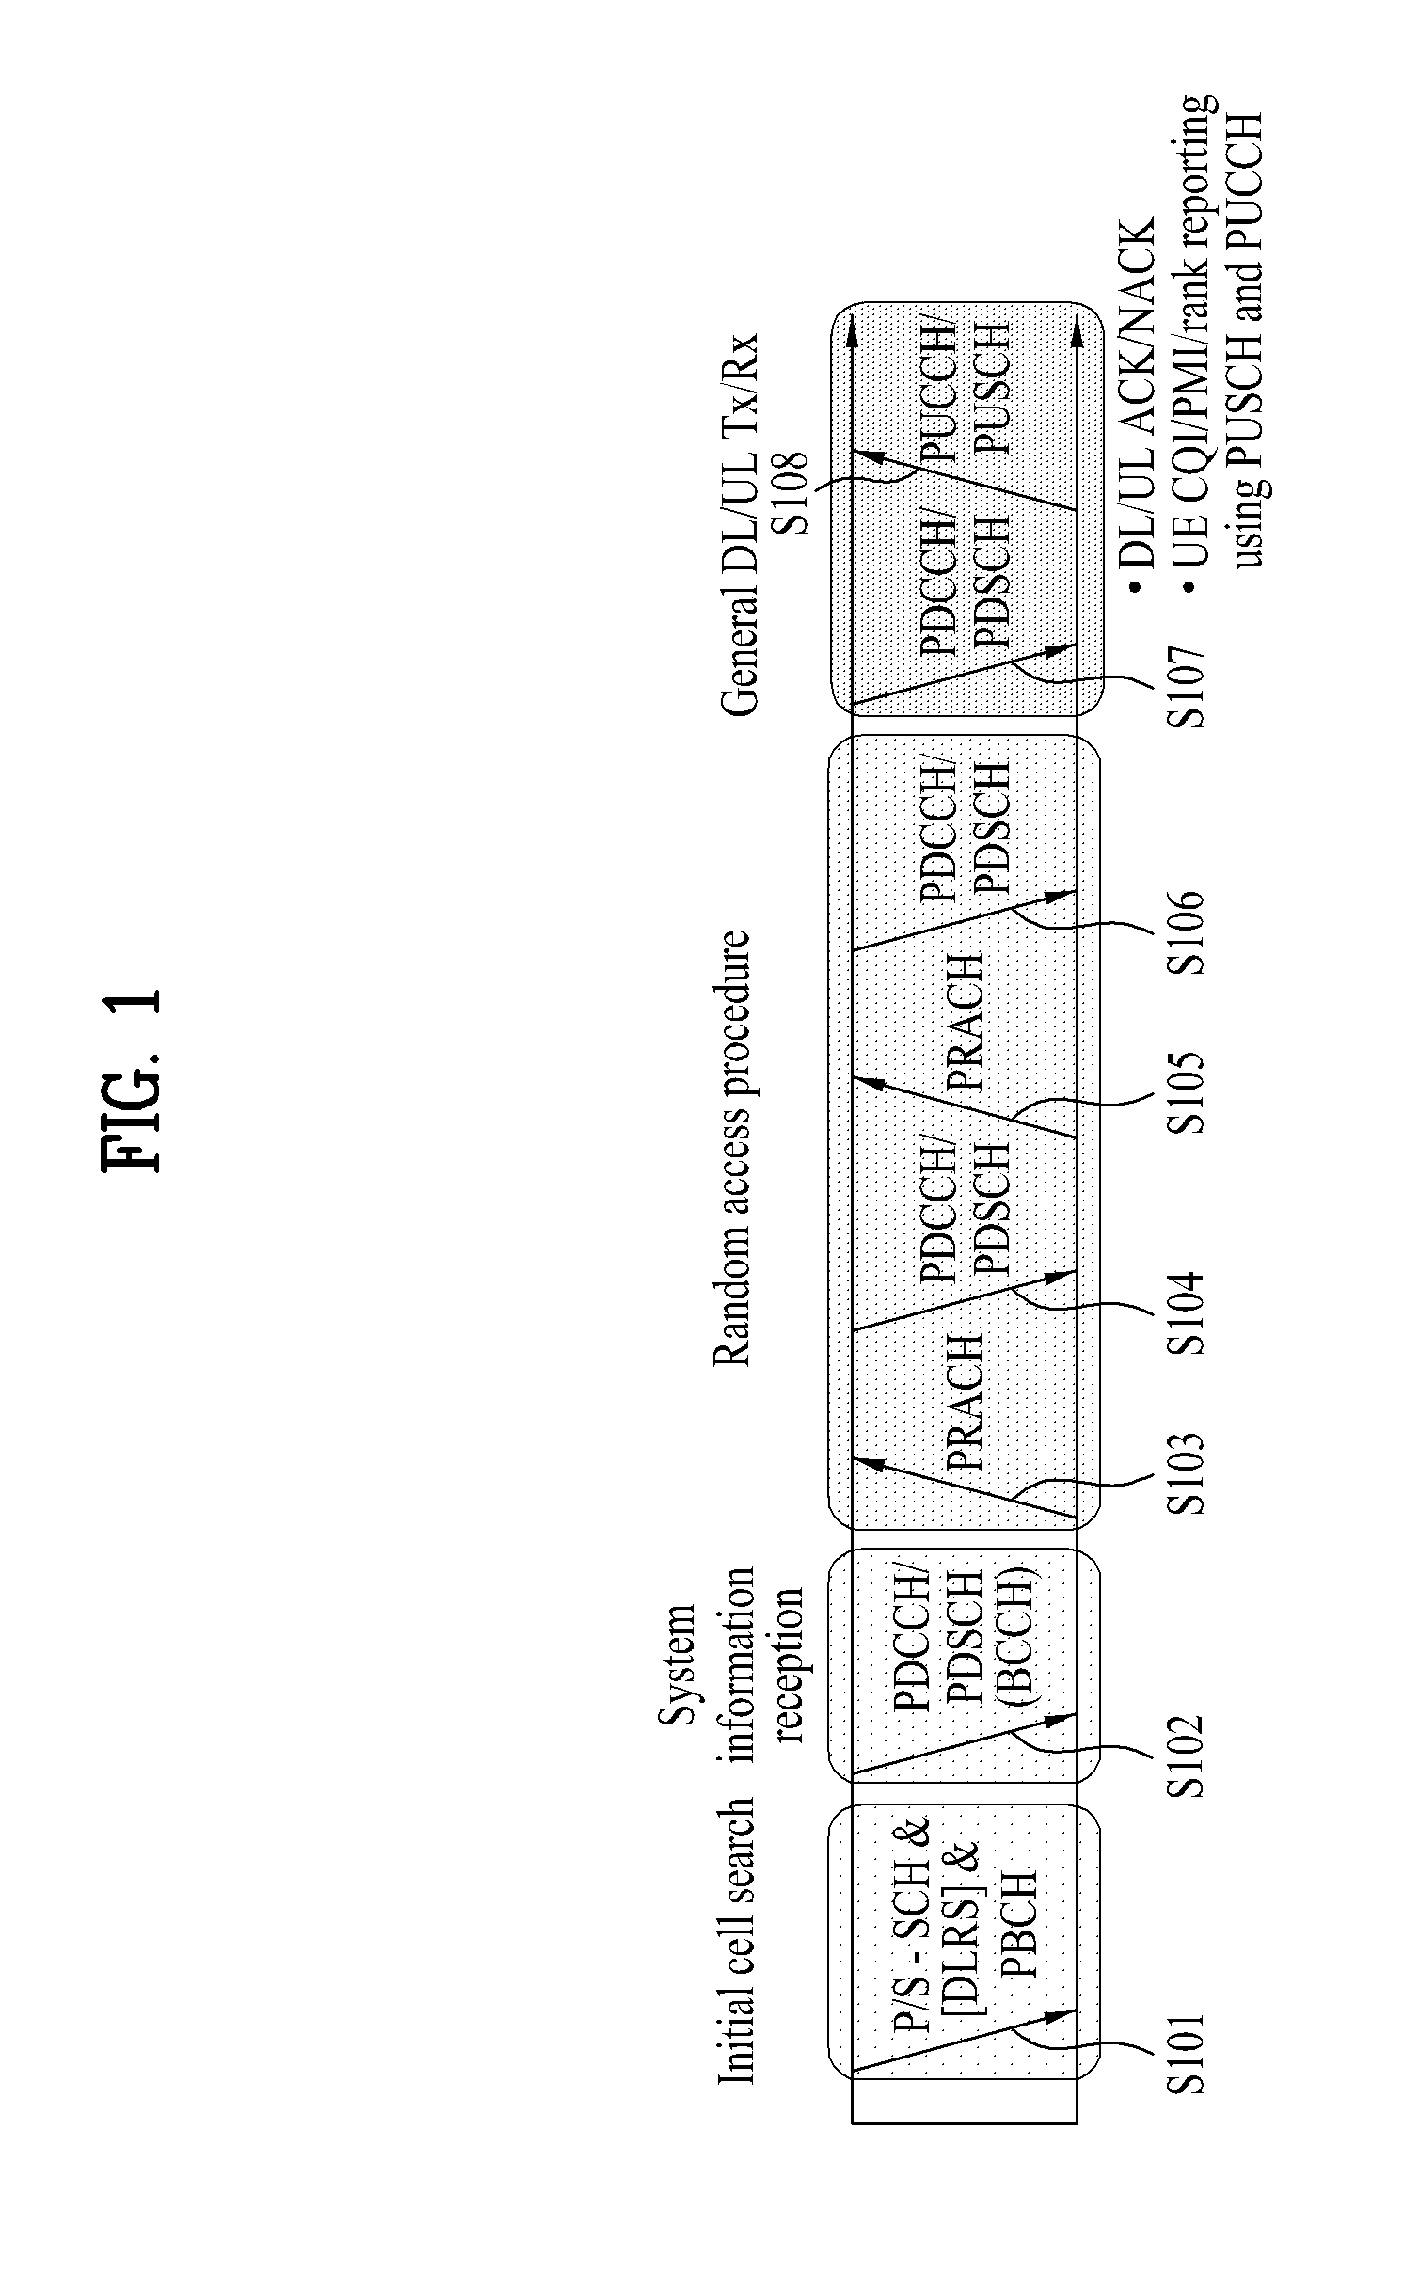 Method for performing channel interleaving in a multi-antenna wireless communication system, and apparatus for same